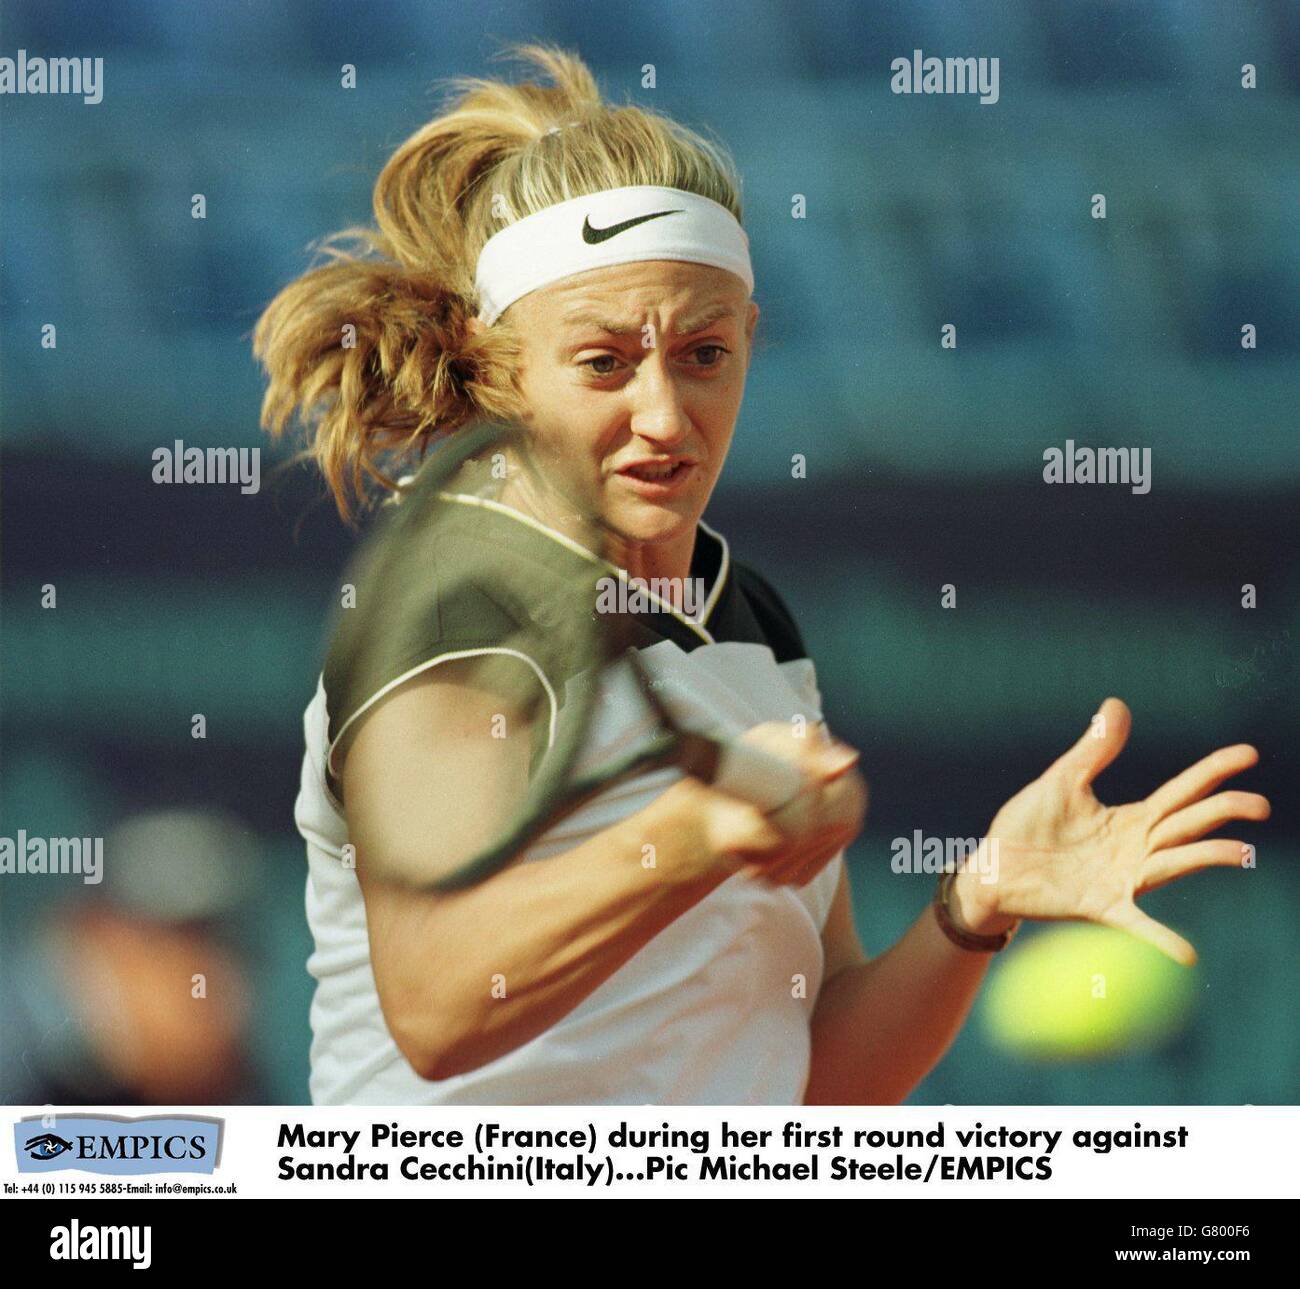 Mary Pierce (France) during her first round victory against Sandra Cecchini(Italy)r Stock Photo